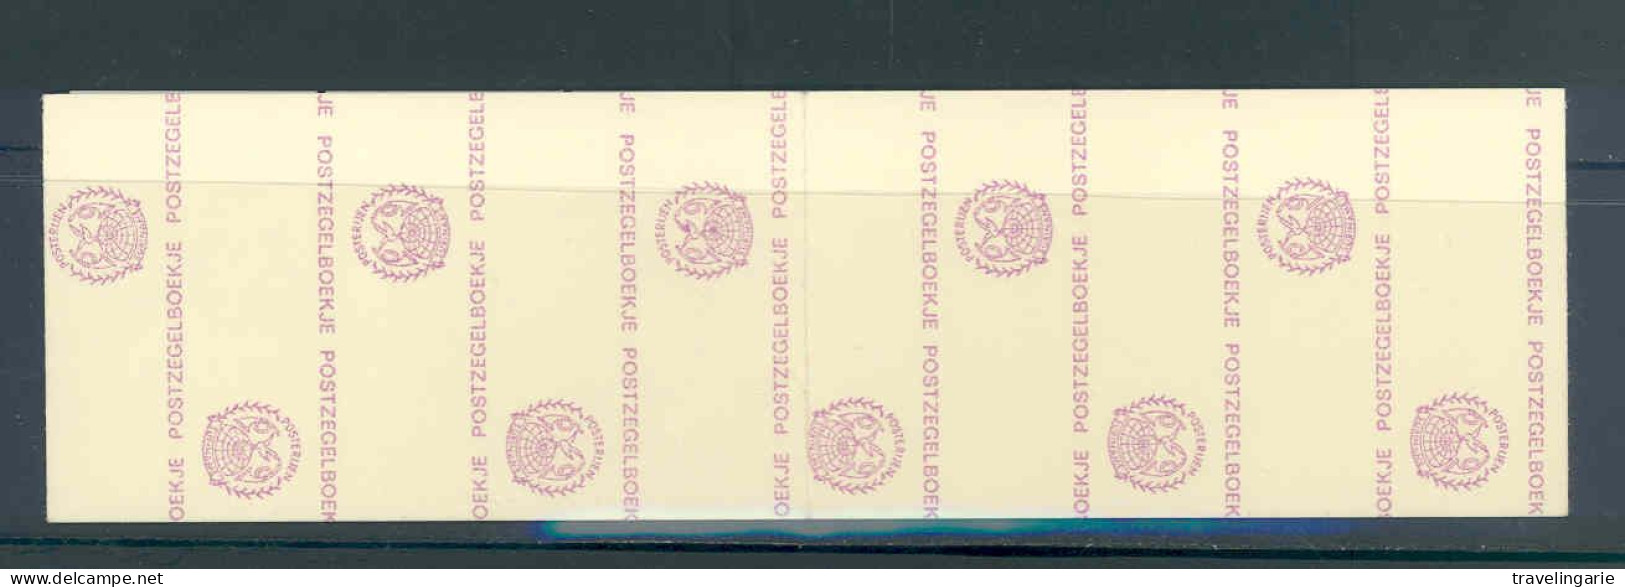 Suriname 1976 Airmail Stamp Booklet MNH/** - Suriname